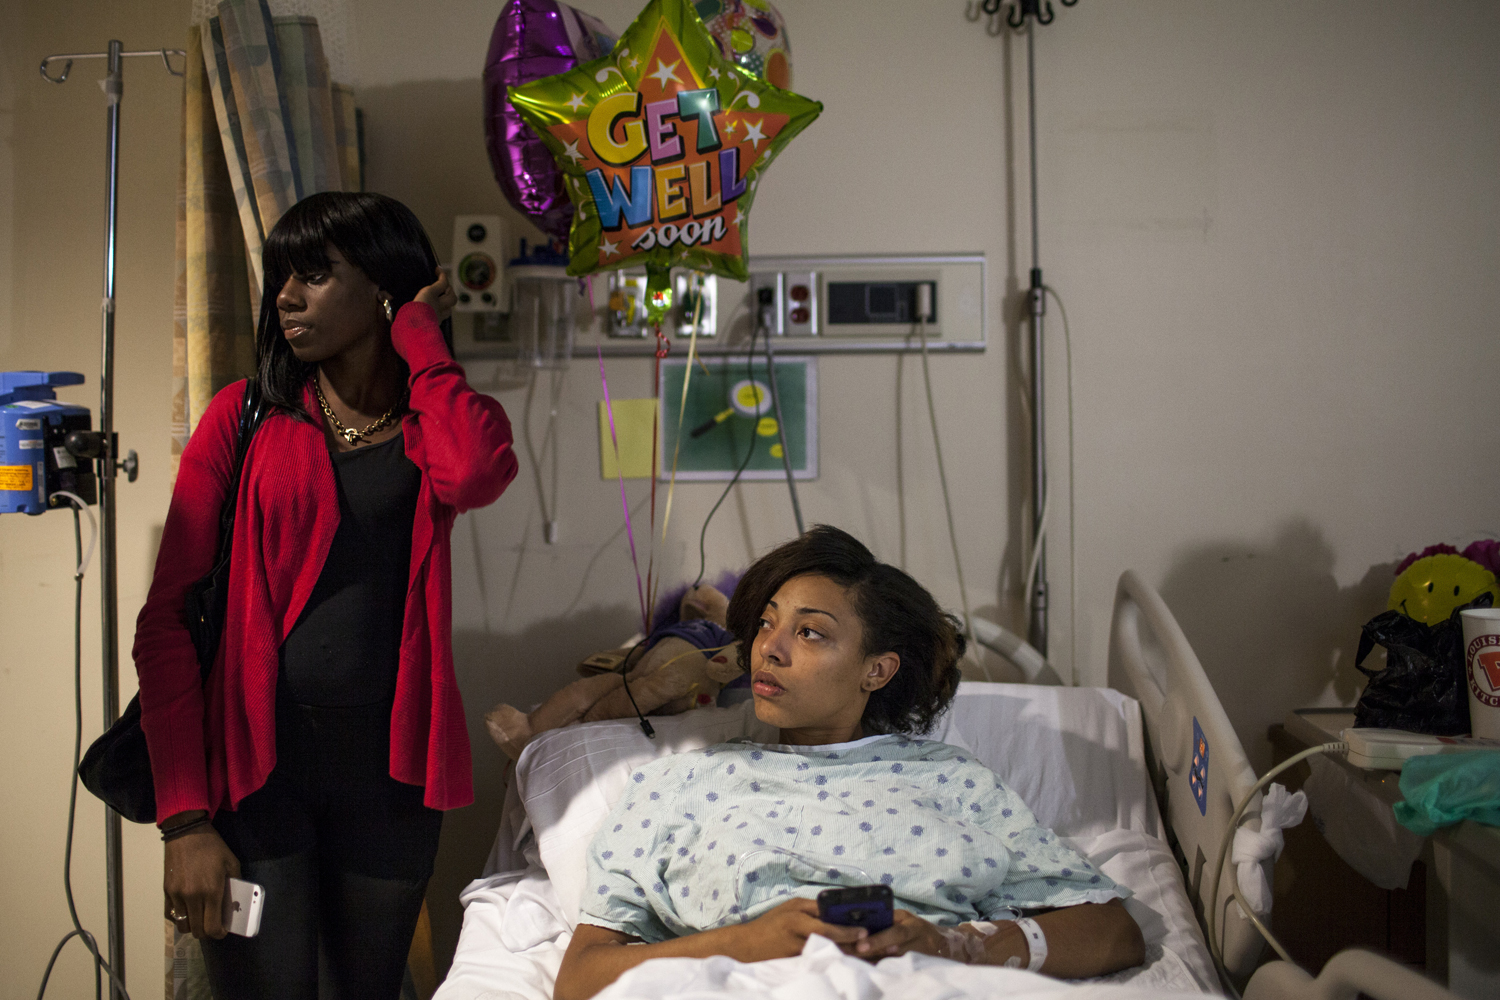 October 2, 2013. Sarah, medicated on high doses of pain killers, lies in a hospital bed surrounded by friends and get well soon gifts, the day after she was shot in the foot outside her family's home in East Flatbush. She heard shots and started to run, but a bullet ricocheted off the sidewalk  and lodged in her heel. It had to be surgically removed.